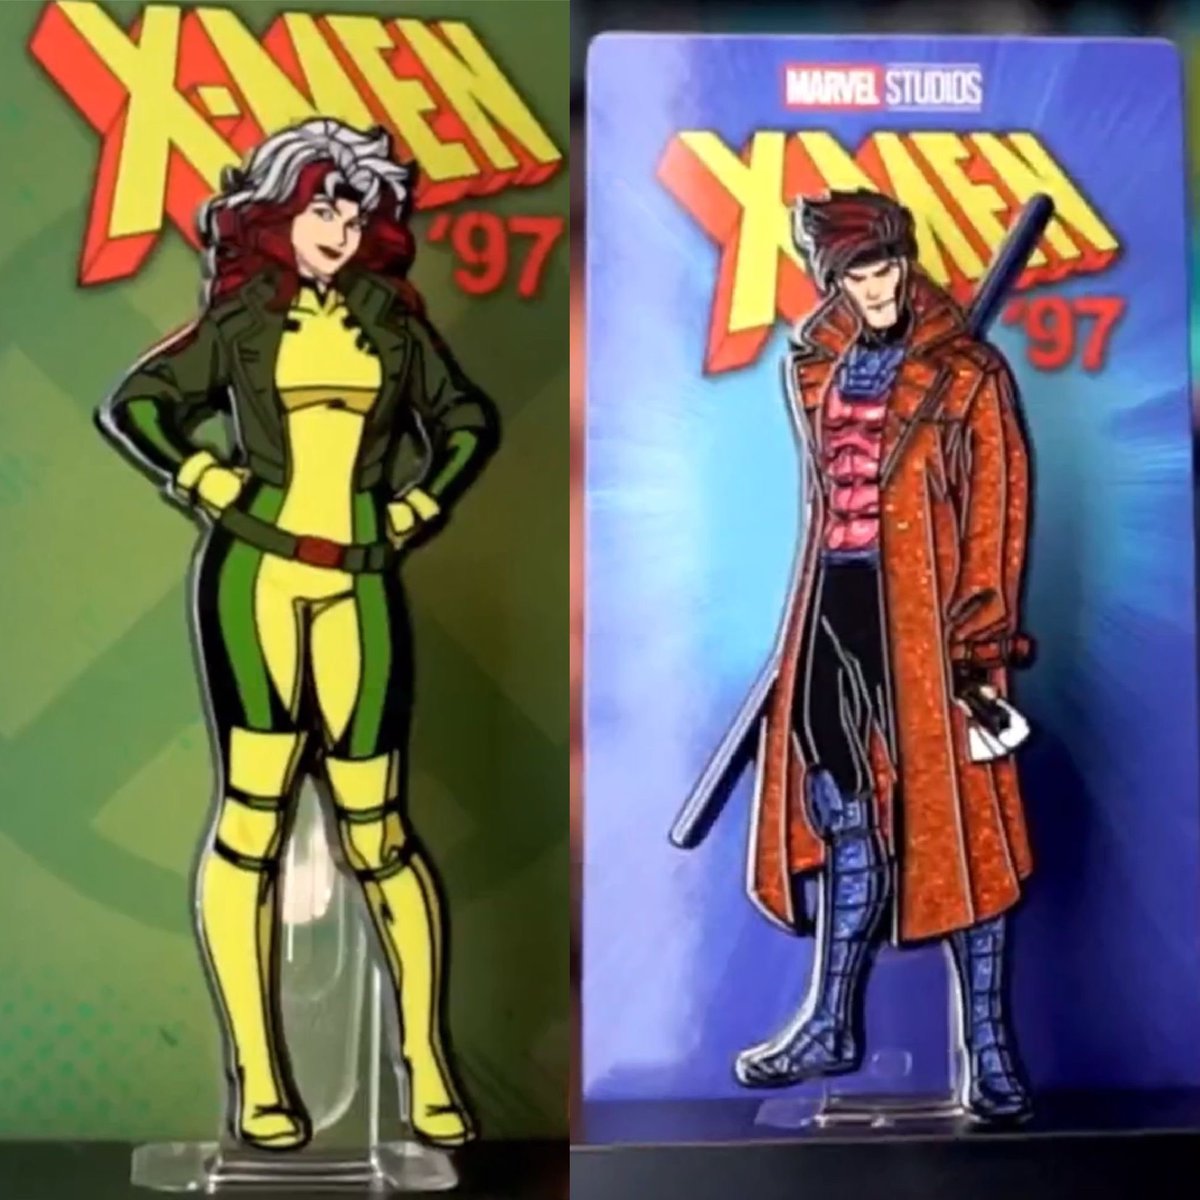 Coming soon to @plasticempire - Rogue and Gambit. 
@figpinofficial #FiGPiNs #FiGPiN #CollectAwesome